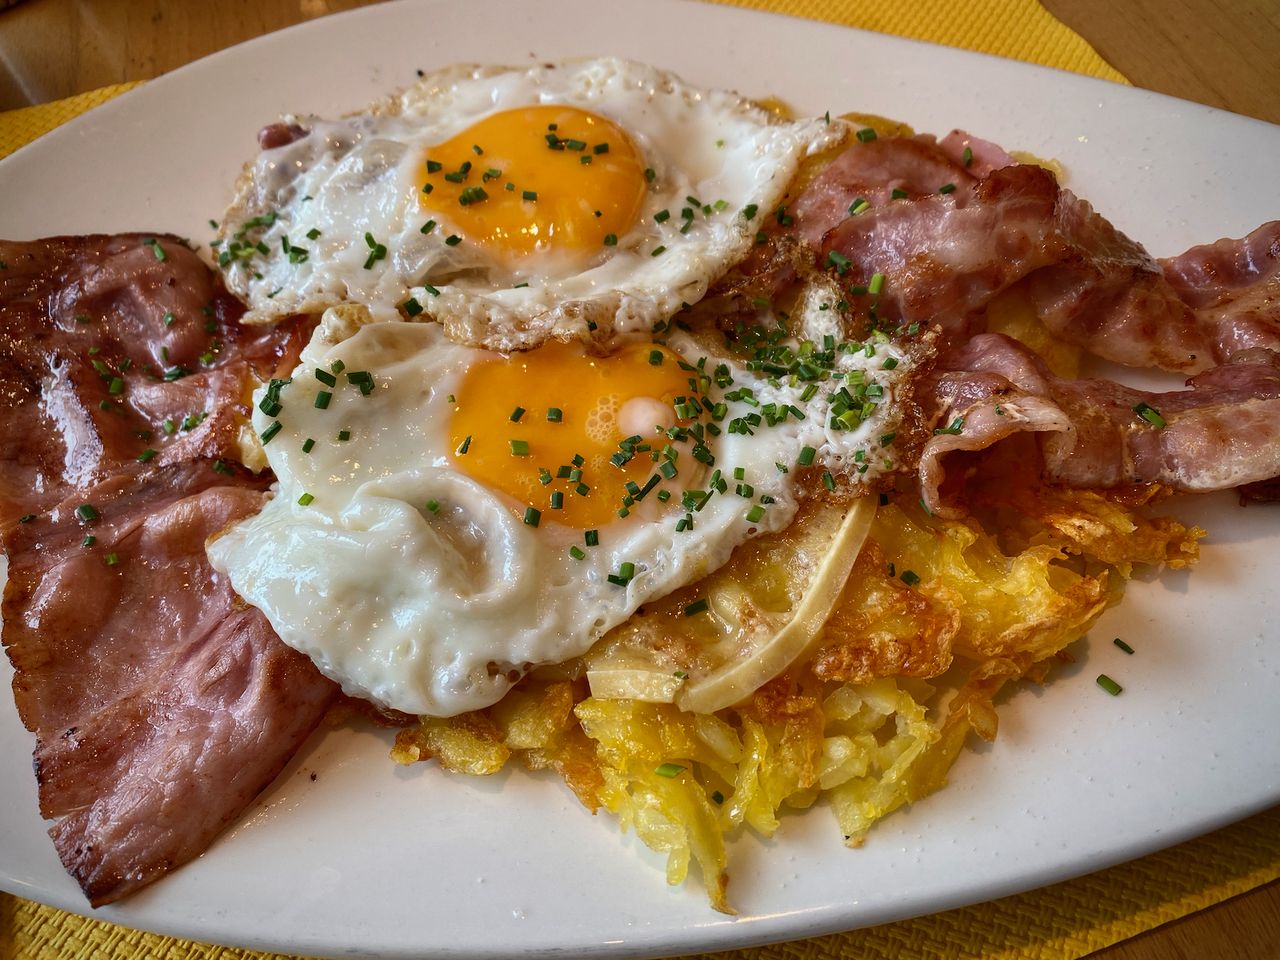 A full plate of fried shredded potatoes, fried ham, fried bacon, melted raclette, and two fried eggs with chives on top.